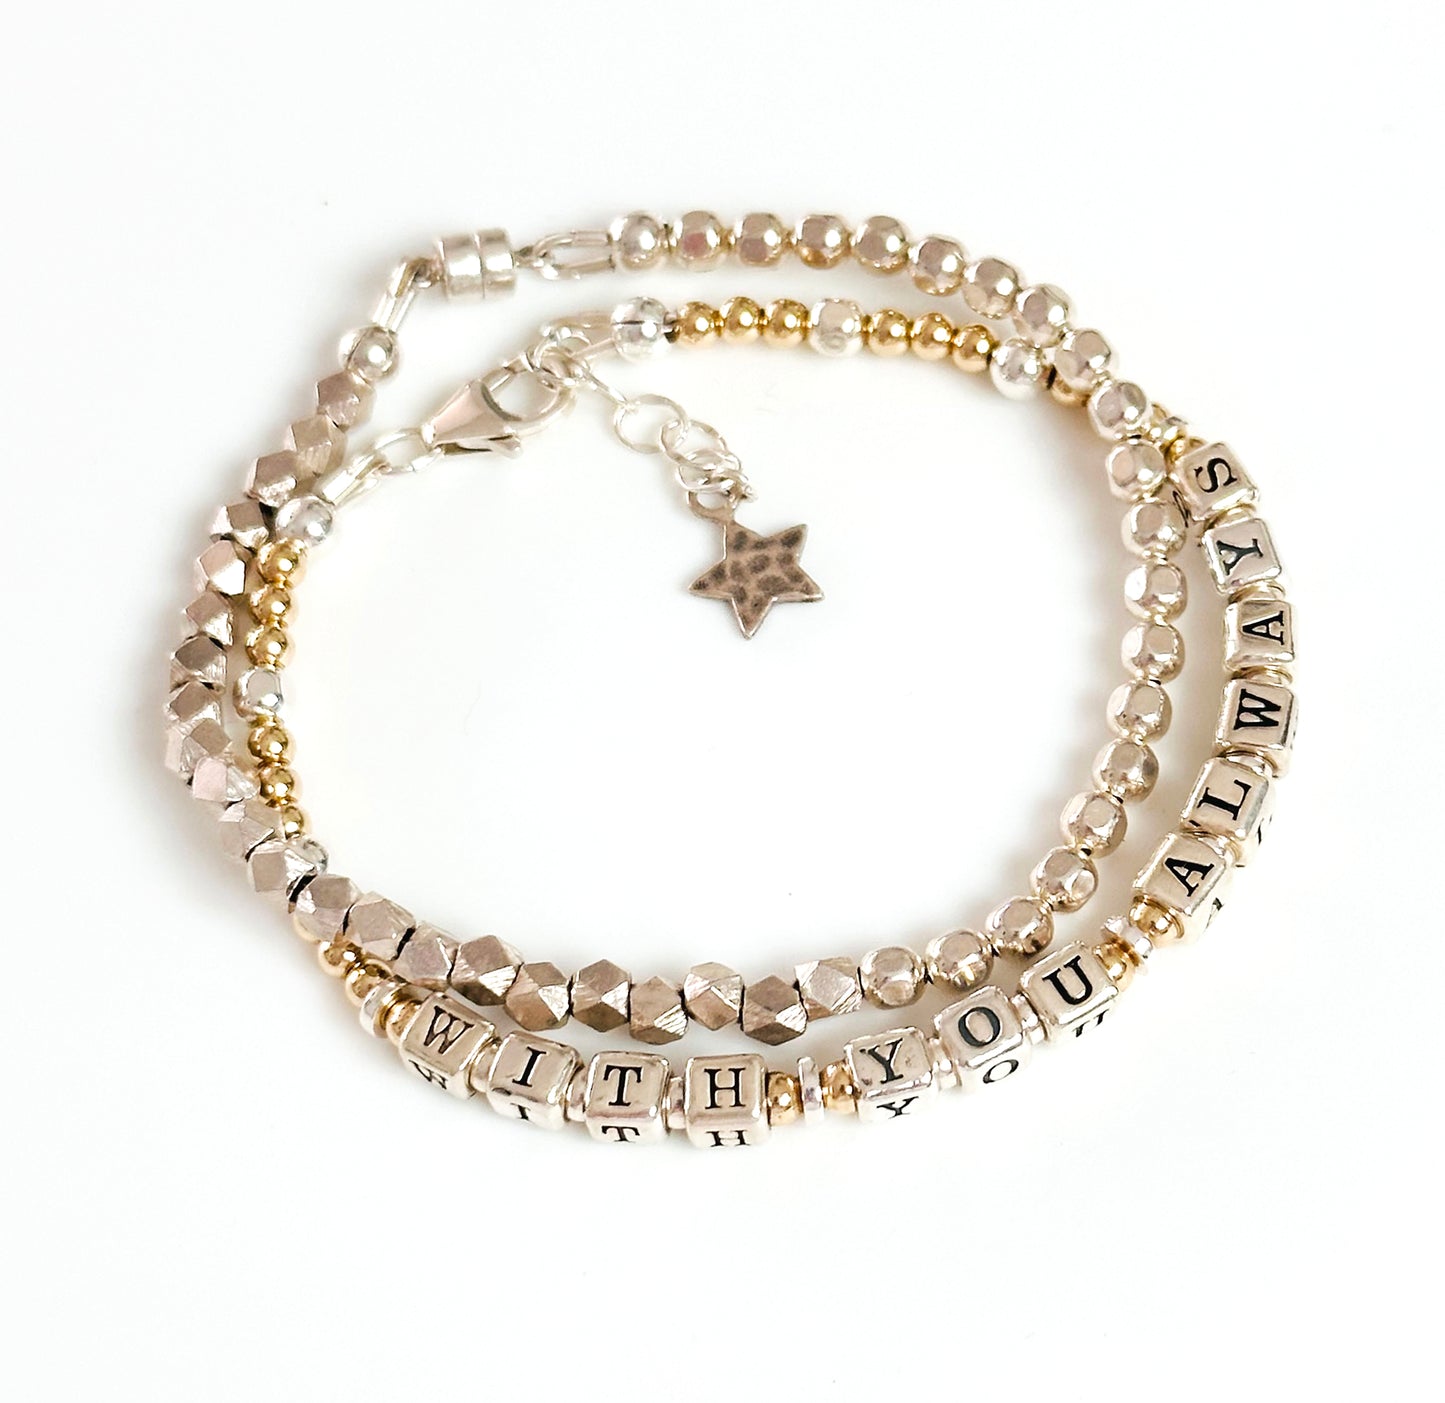 Sympathy Memorial Bereavement Gift Bracelet "With You Always" in Mixed Metals, Sterling, 14k Gold